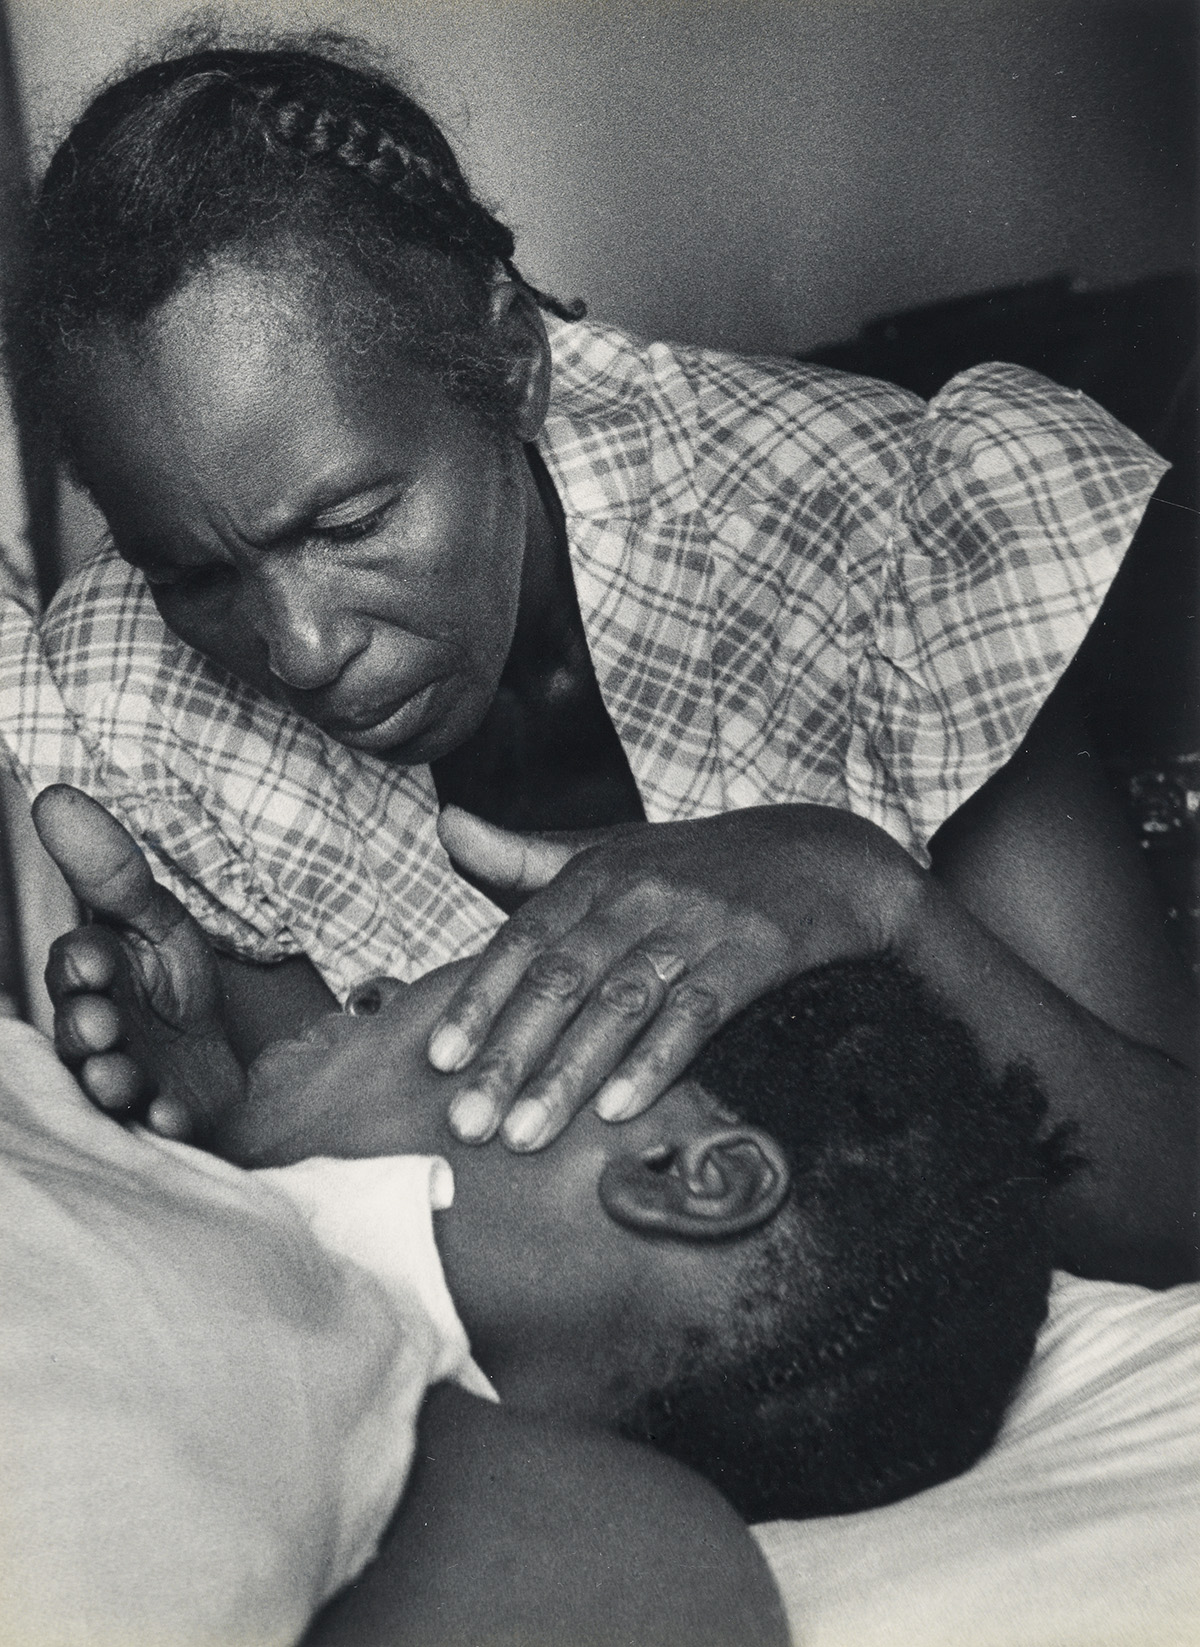 W. EUGENE SMITH (1918-1978) The mothers aunt, Catherine Prileau, trying to soothe her niece, from the Nurse Midwife photo essay in LIF